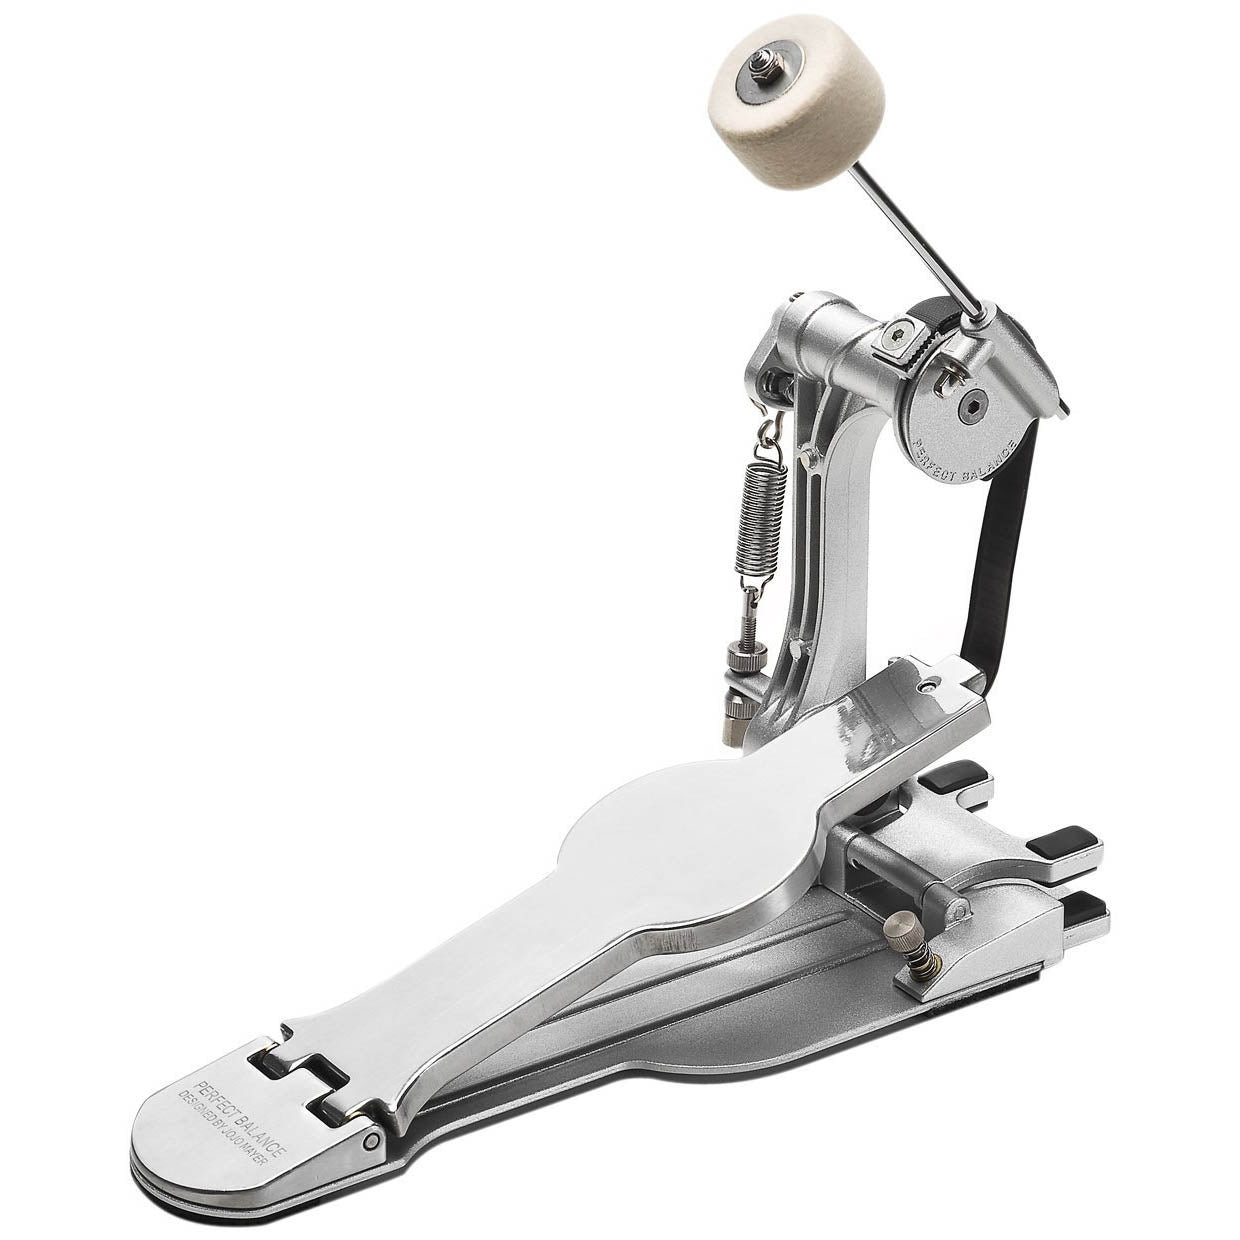 Sonor Drums Perfect Balance Pedal by Jojo Mayer – Alto Music